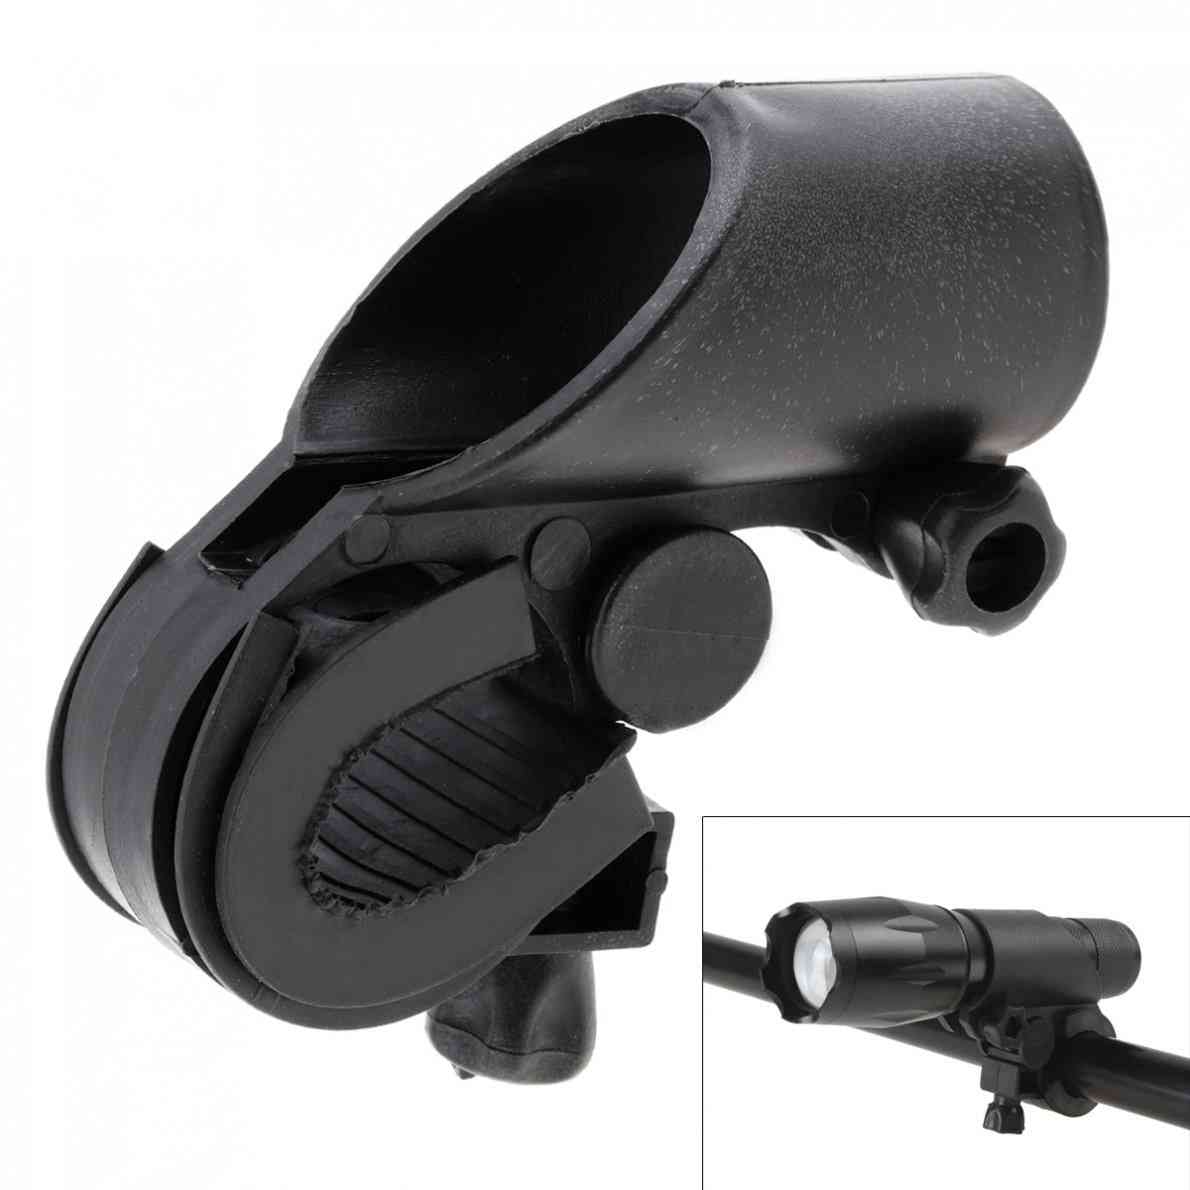 High-quality Durable Black Bicycle Light Holder Lamp Clip